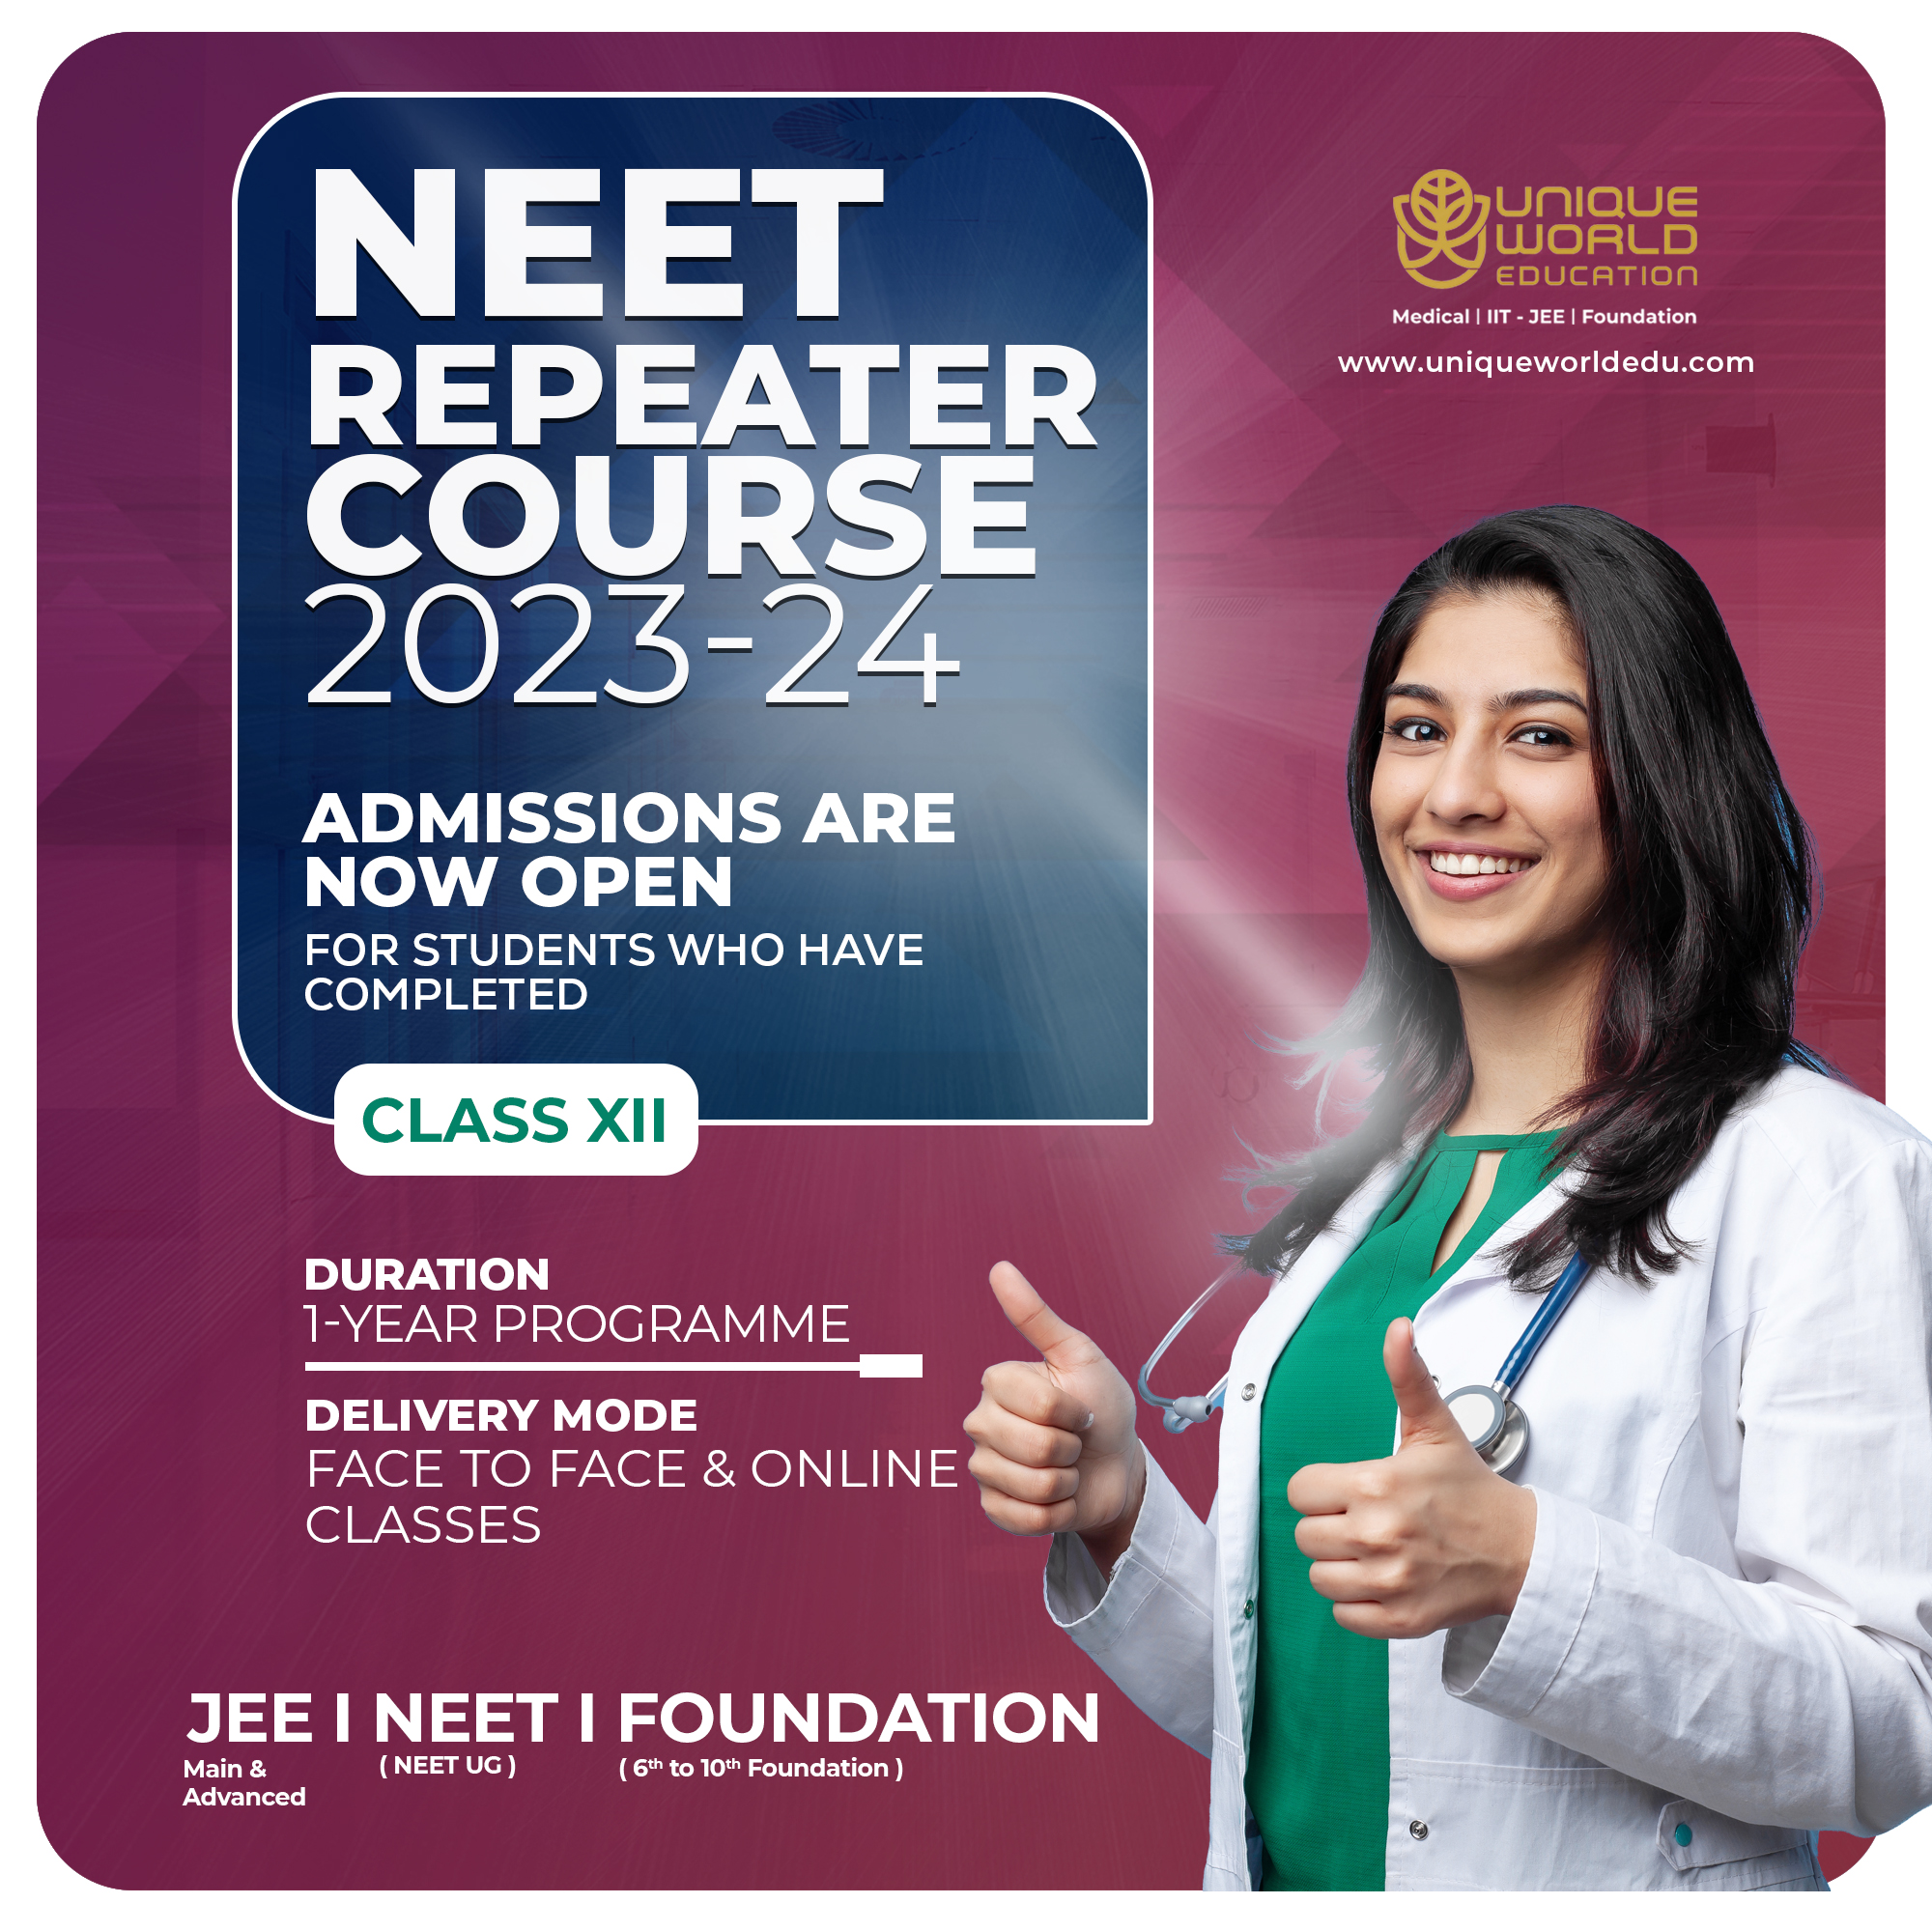 NEET Repeater Coaching in Dubai & Abu Dhabi: Achieve Your Medical Dreams with Unique World Education